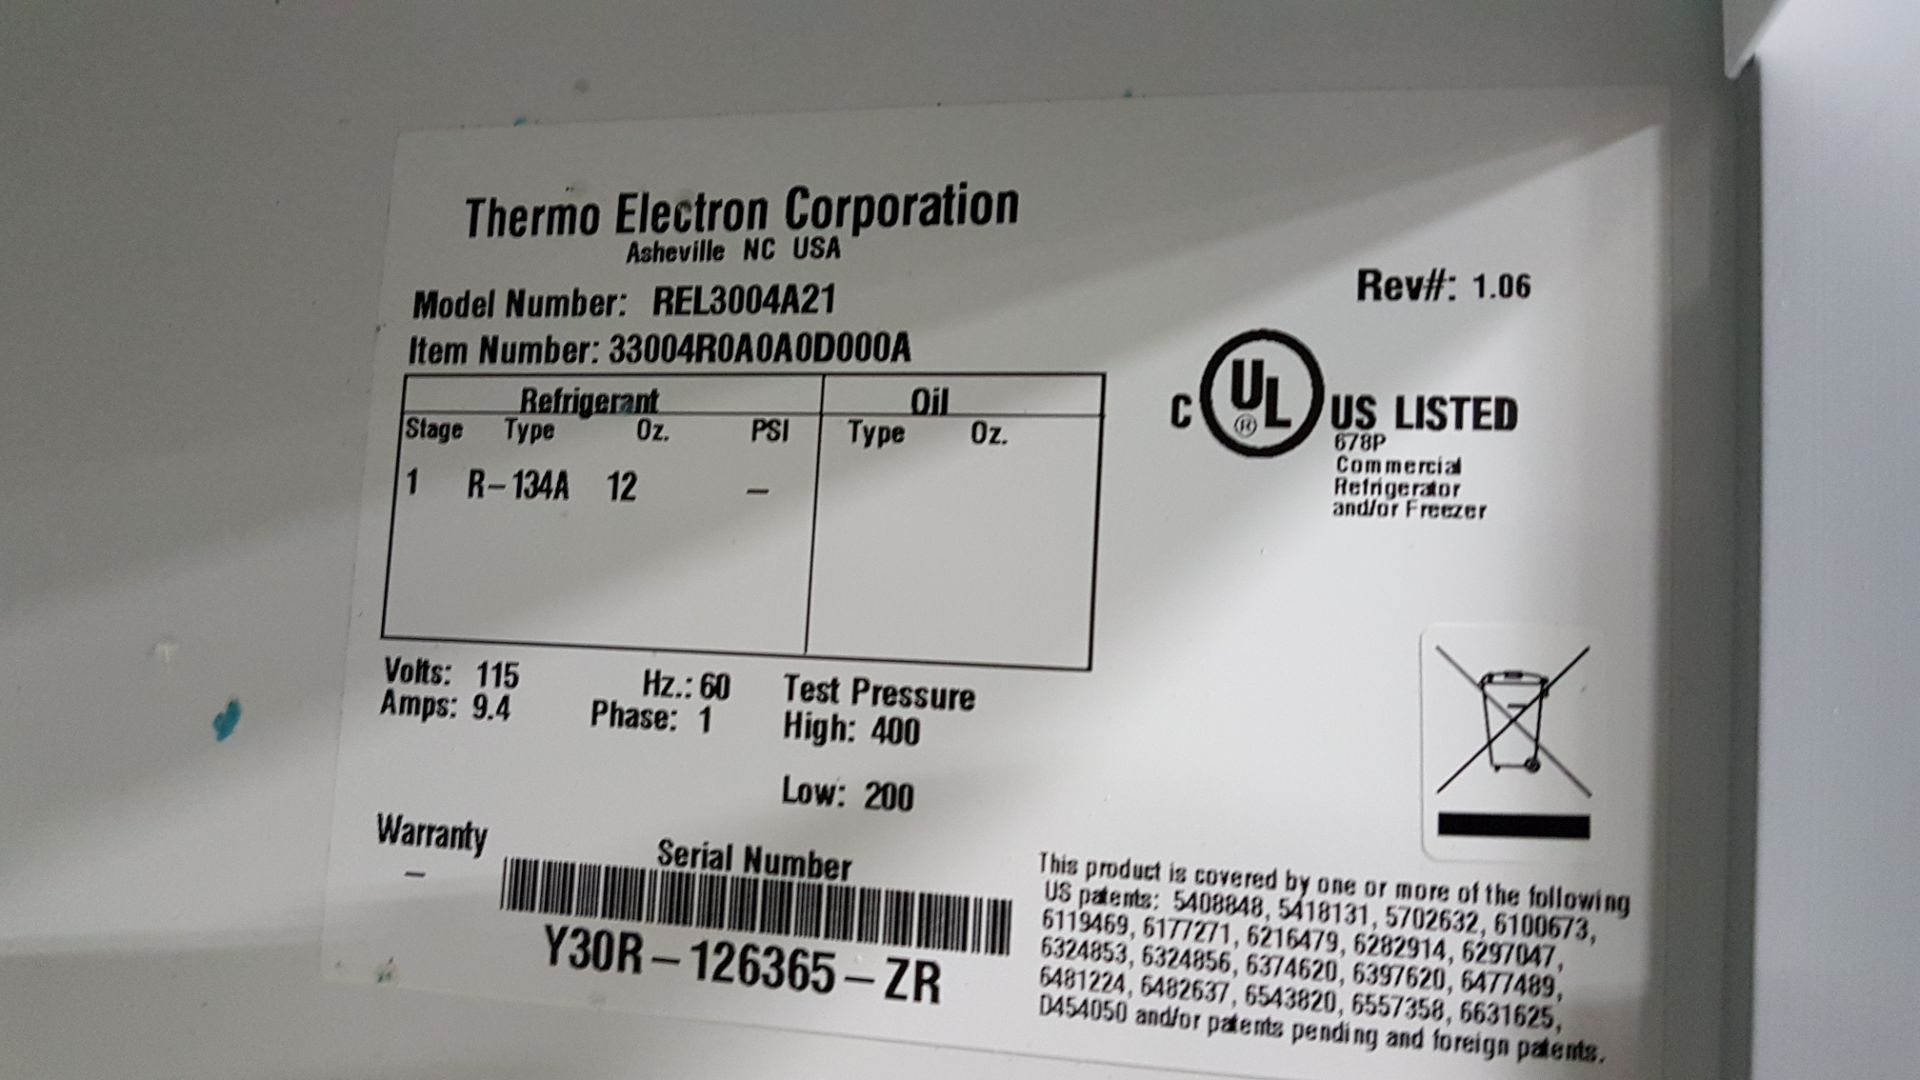 Thermo Electron freezer, model REL3004A21, 29" W x 26" D x 52"H chamber, 115 volts. - Image 15 of 18